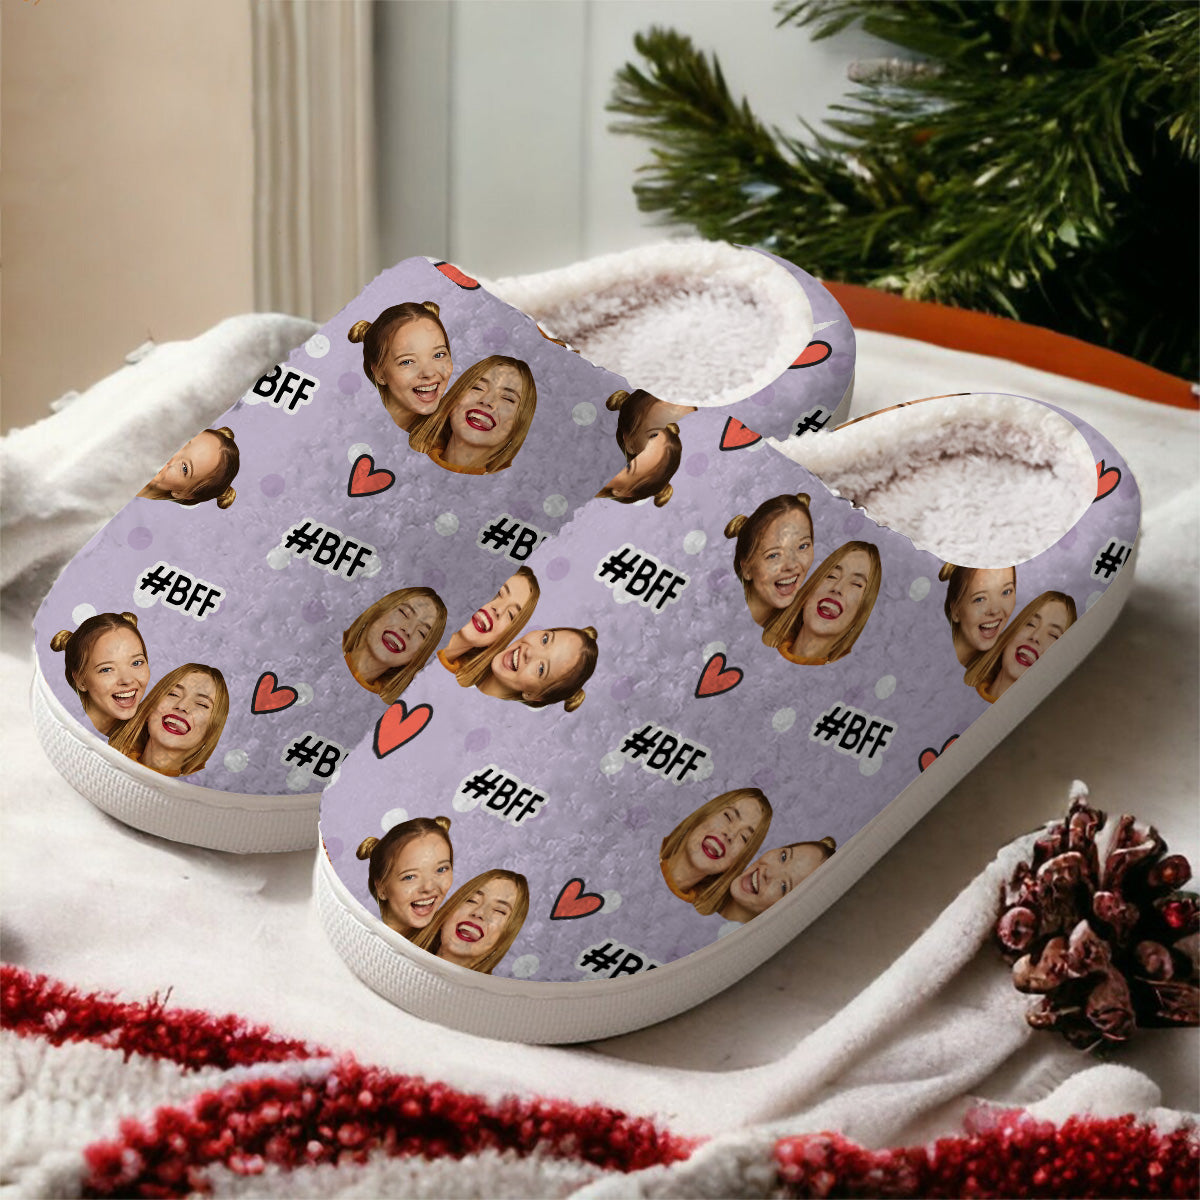 Discover Custom Upload Photo BFF Forever - Gift for friend - Personalized Slippers